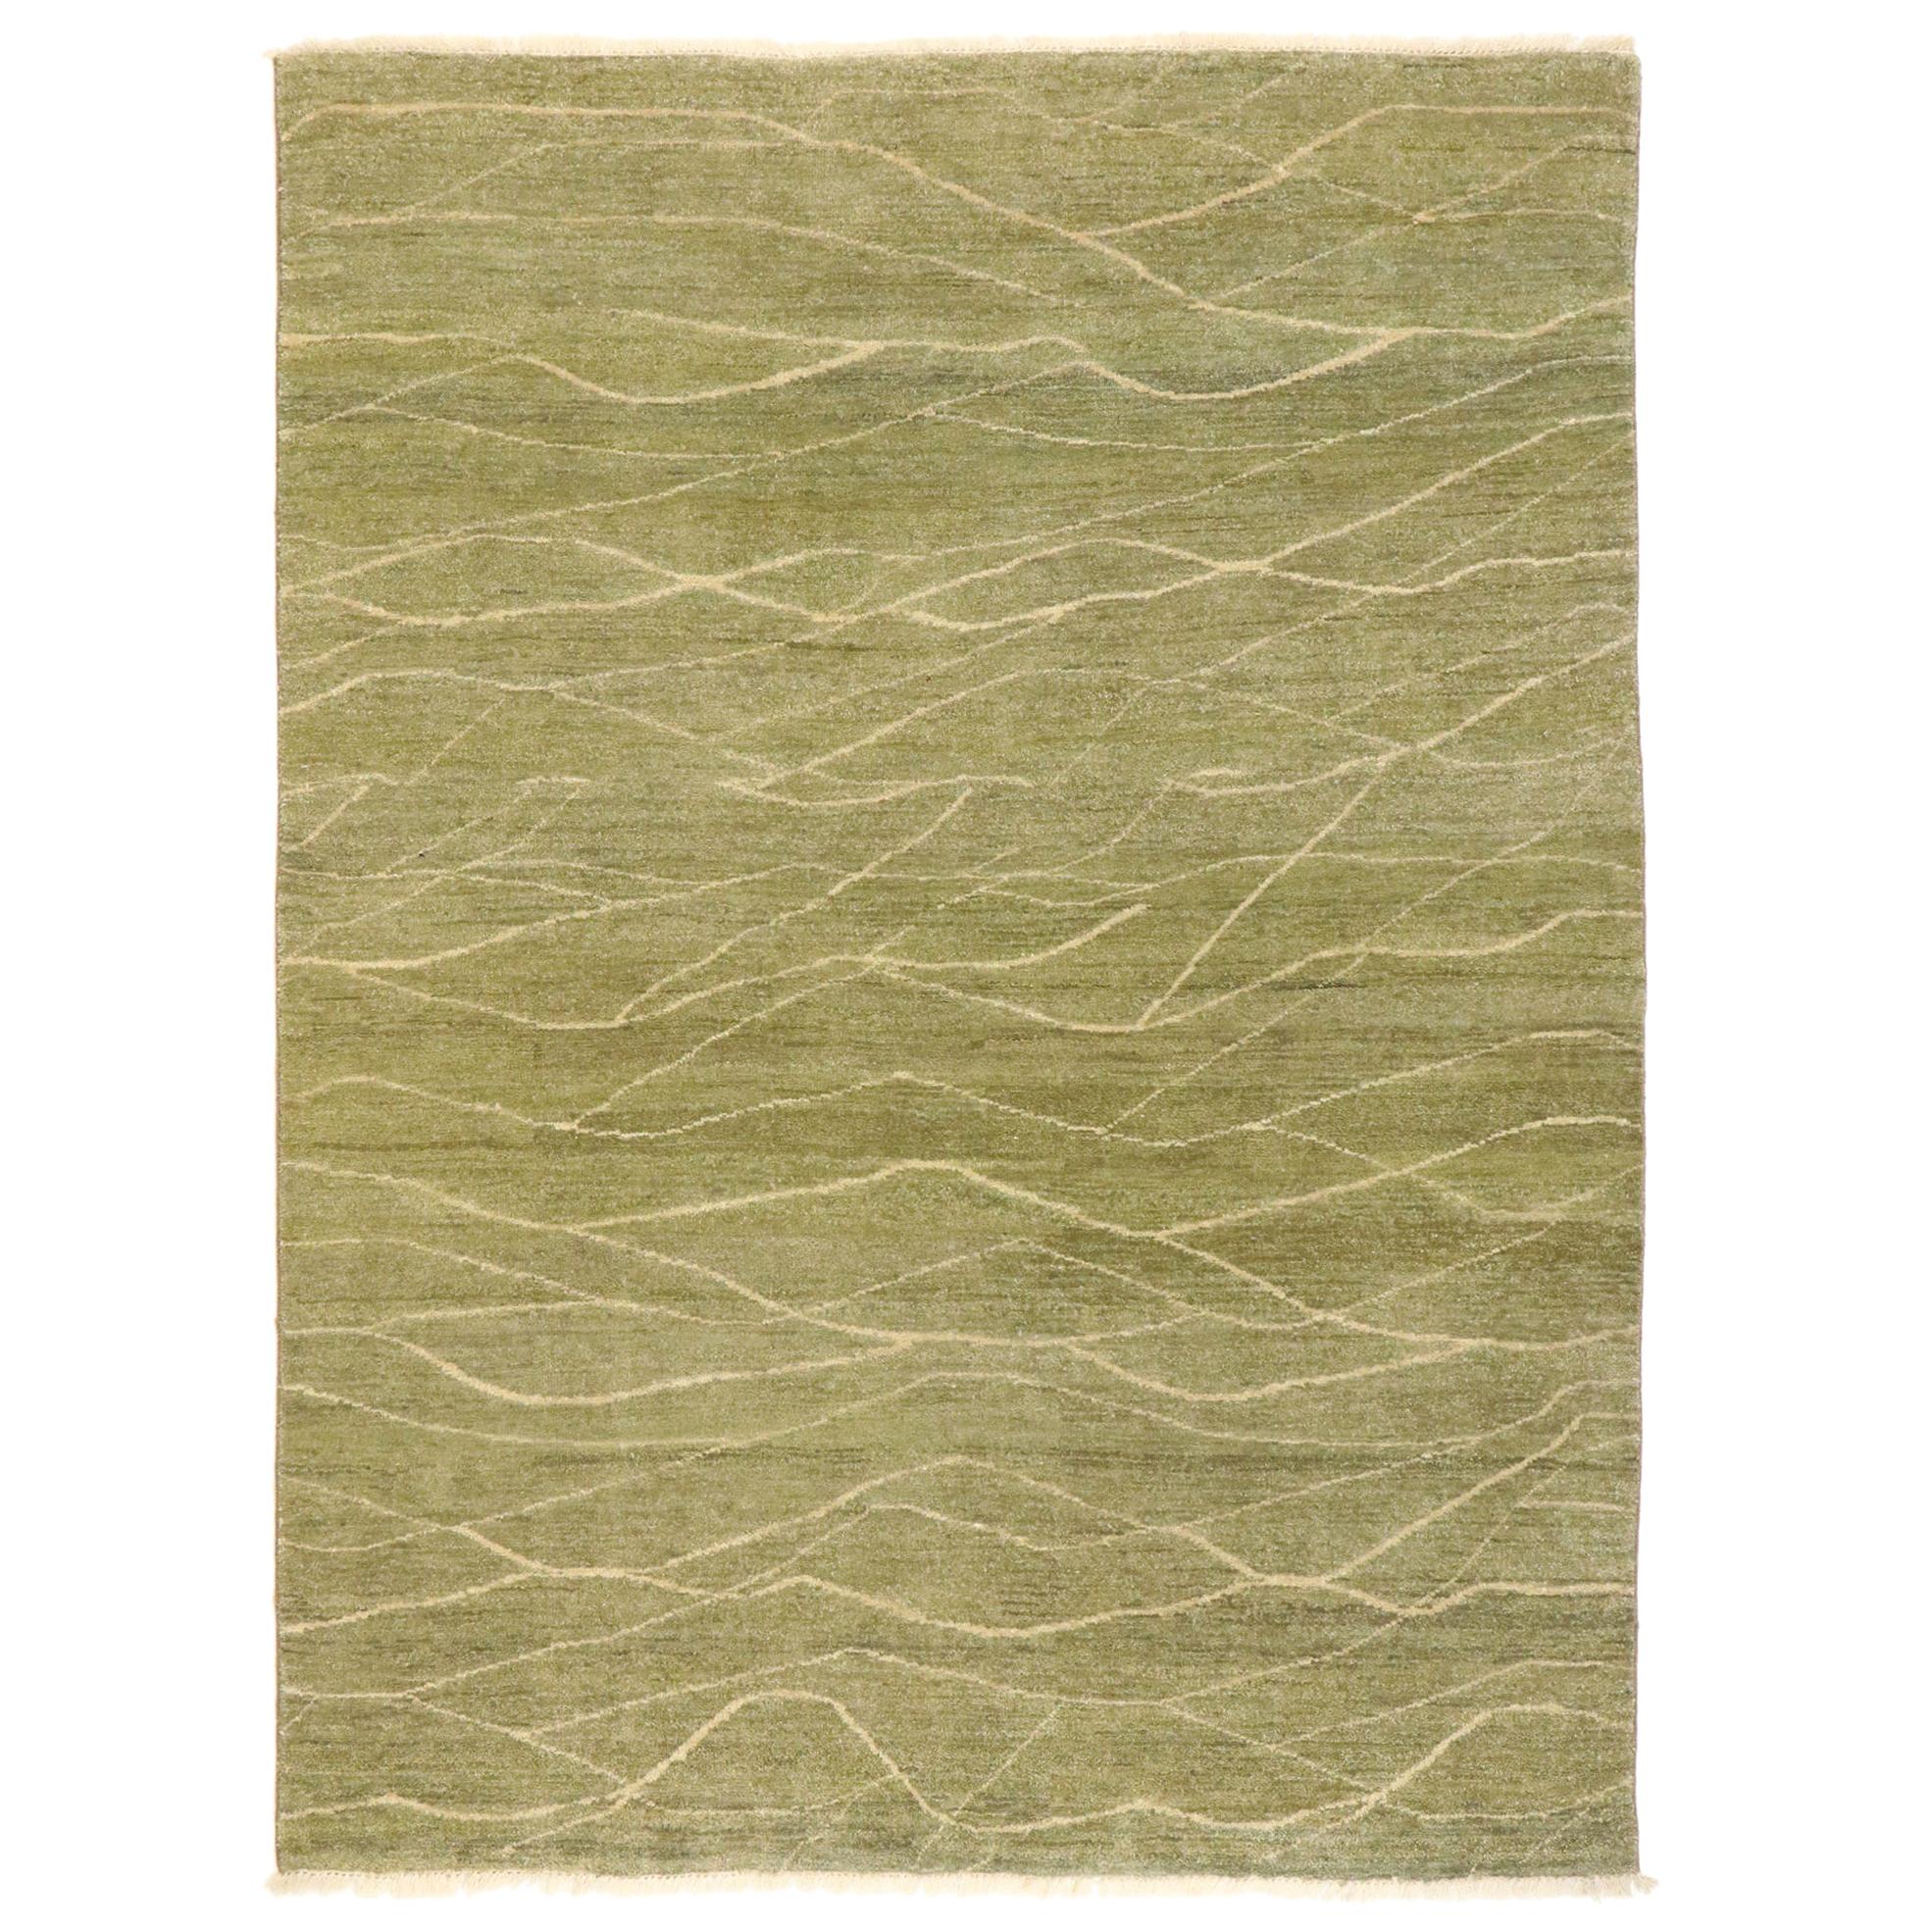 New Transitional Accent Rug with Metamorphic Organic Modern Style